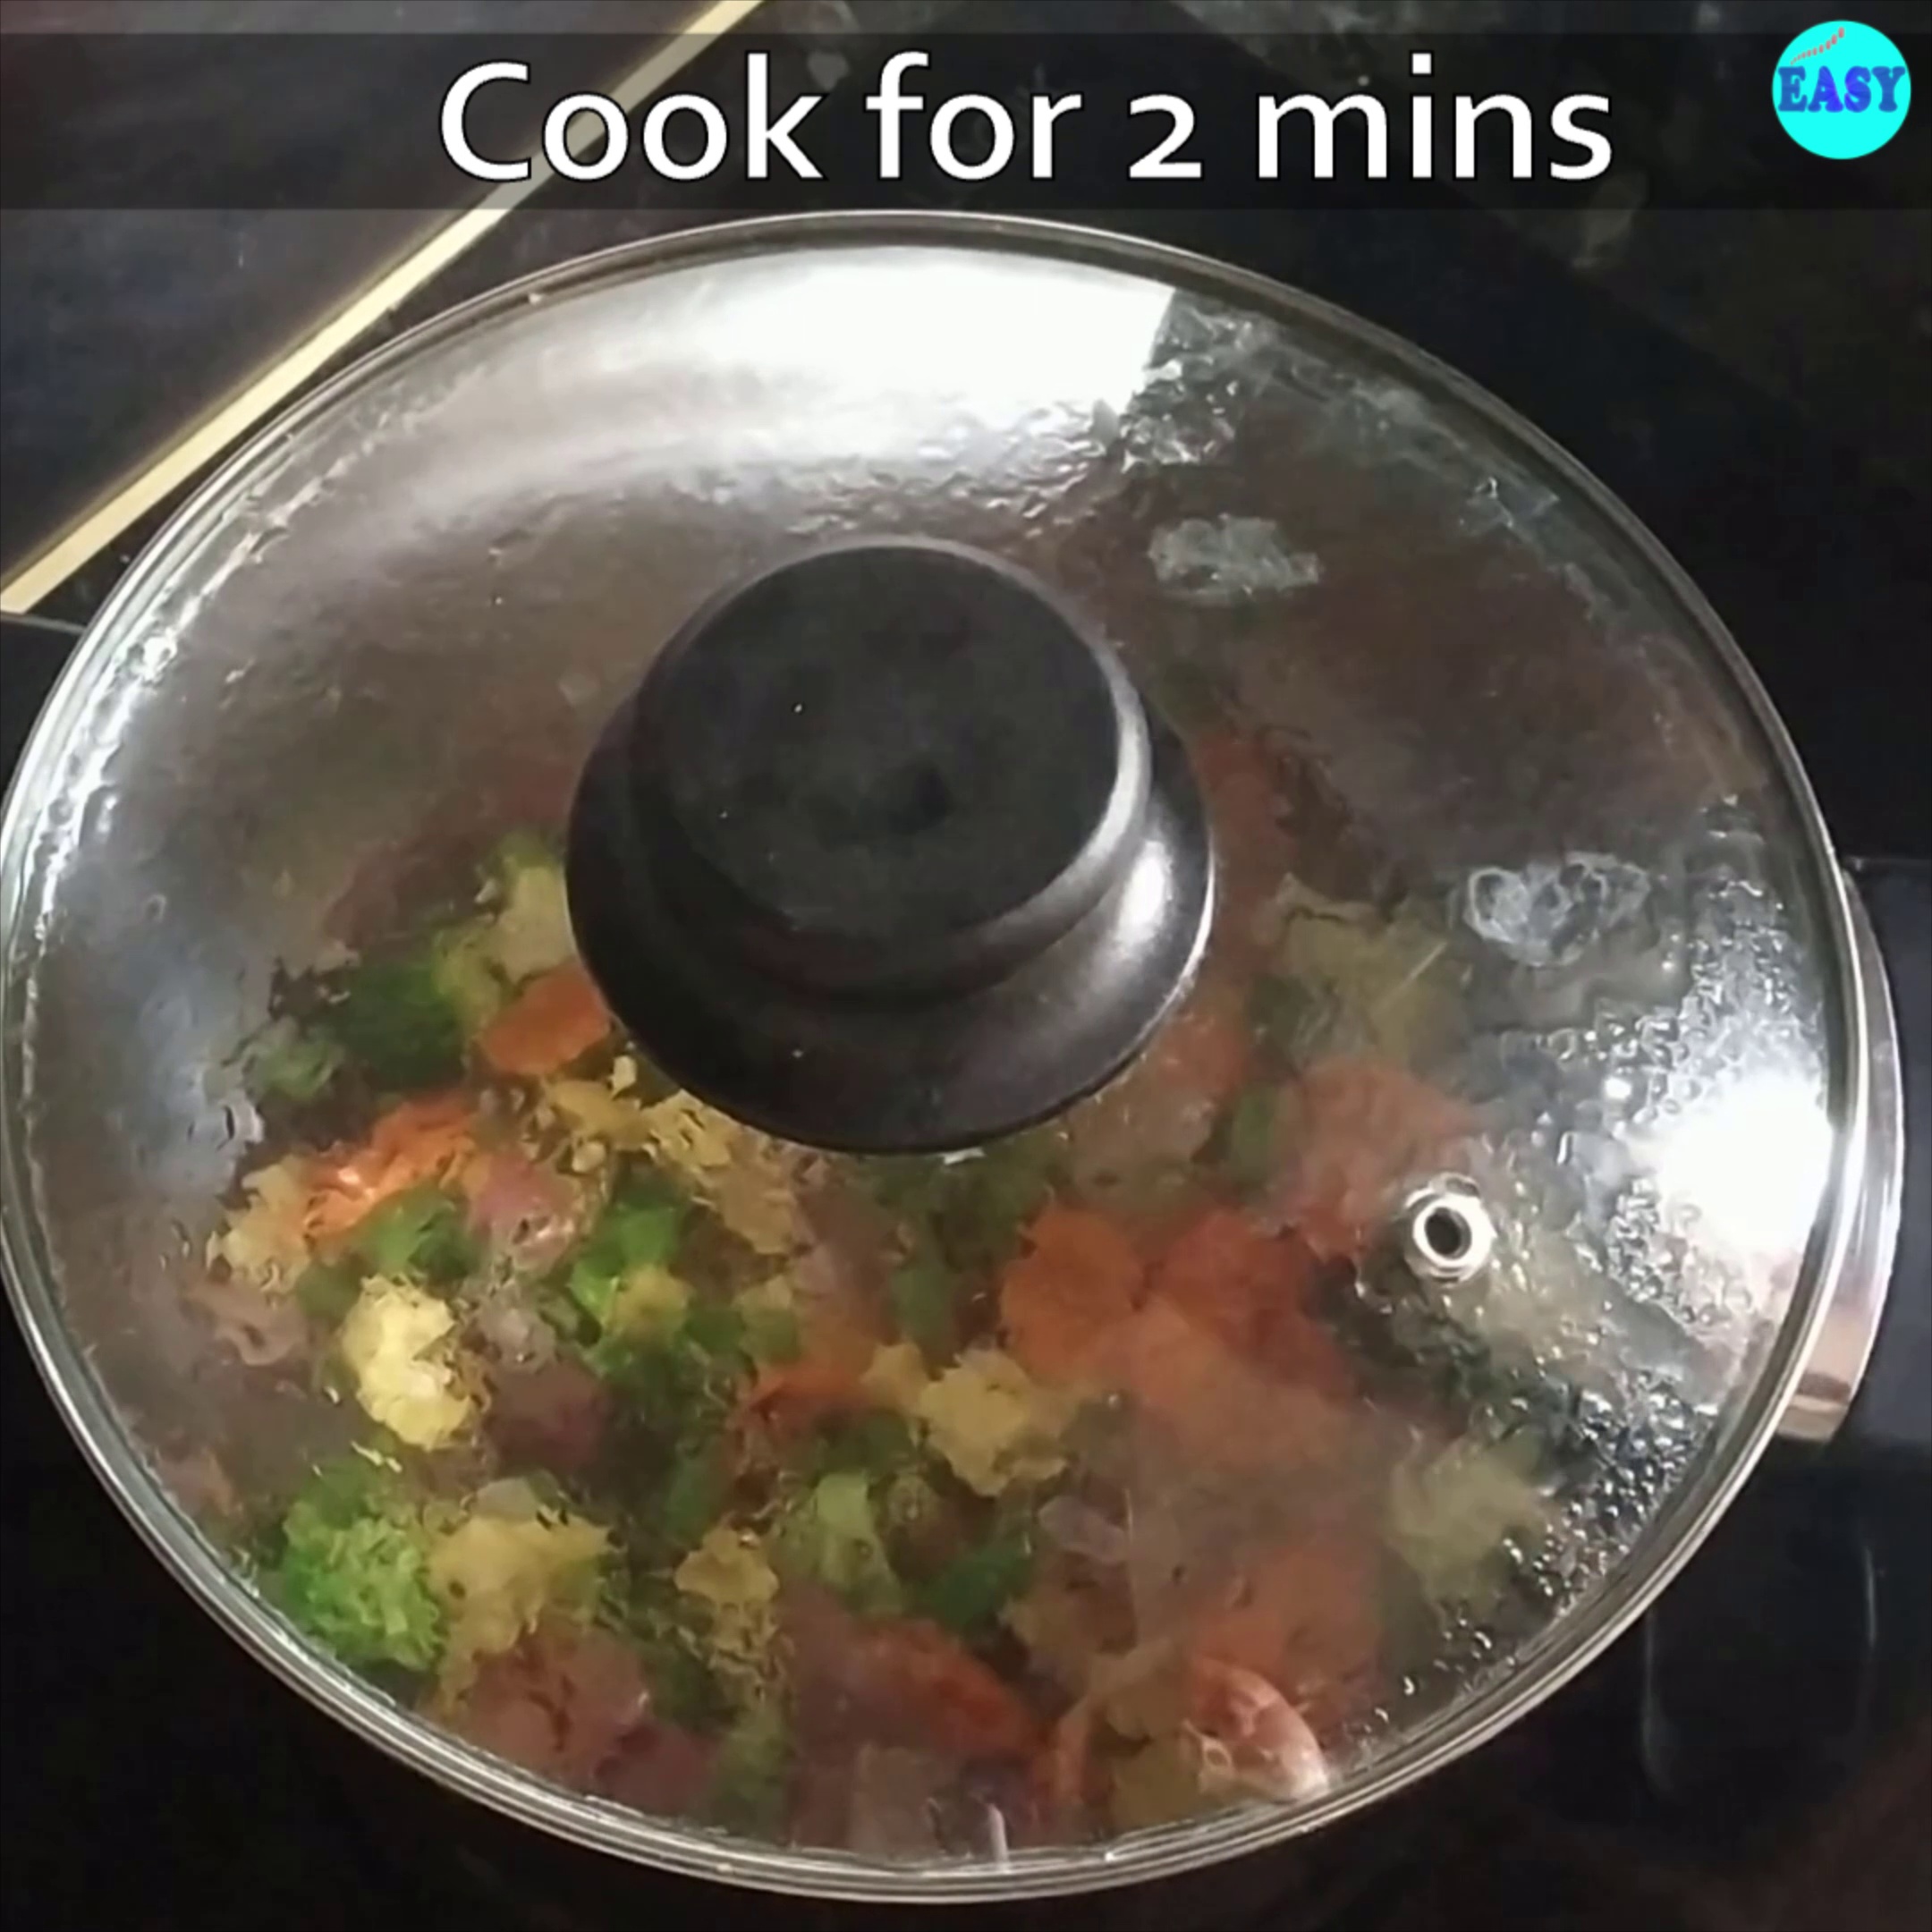 Step 5 - Cover and cook for 1-2 minutes on low heat.